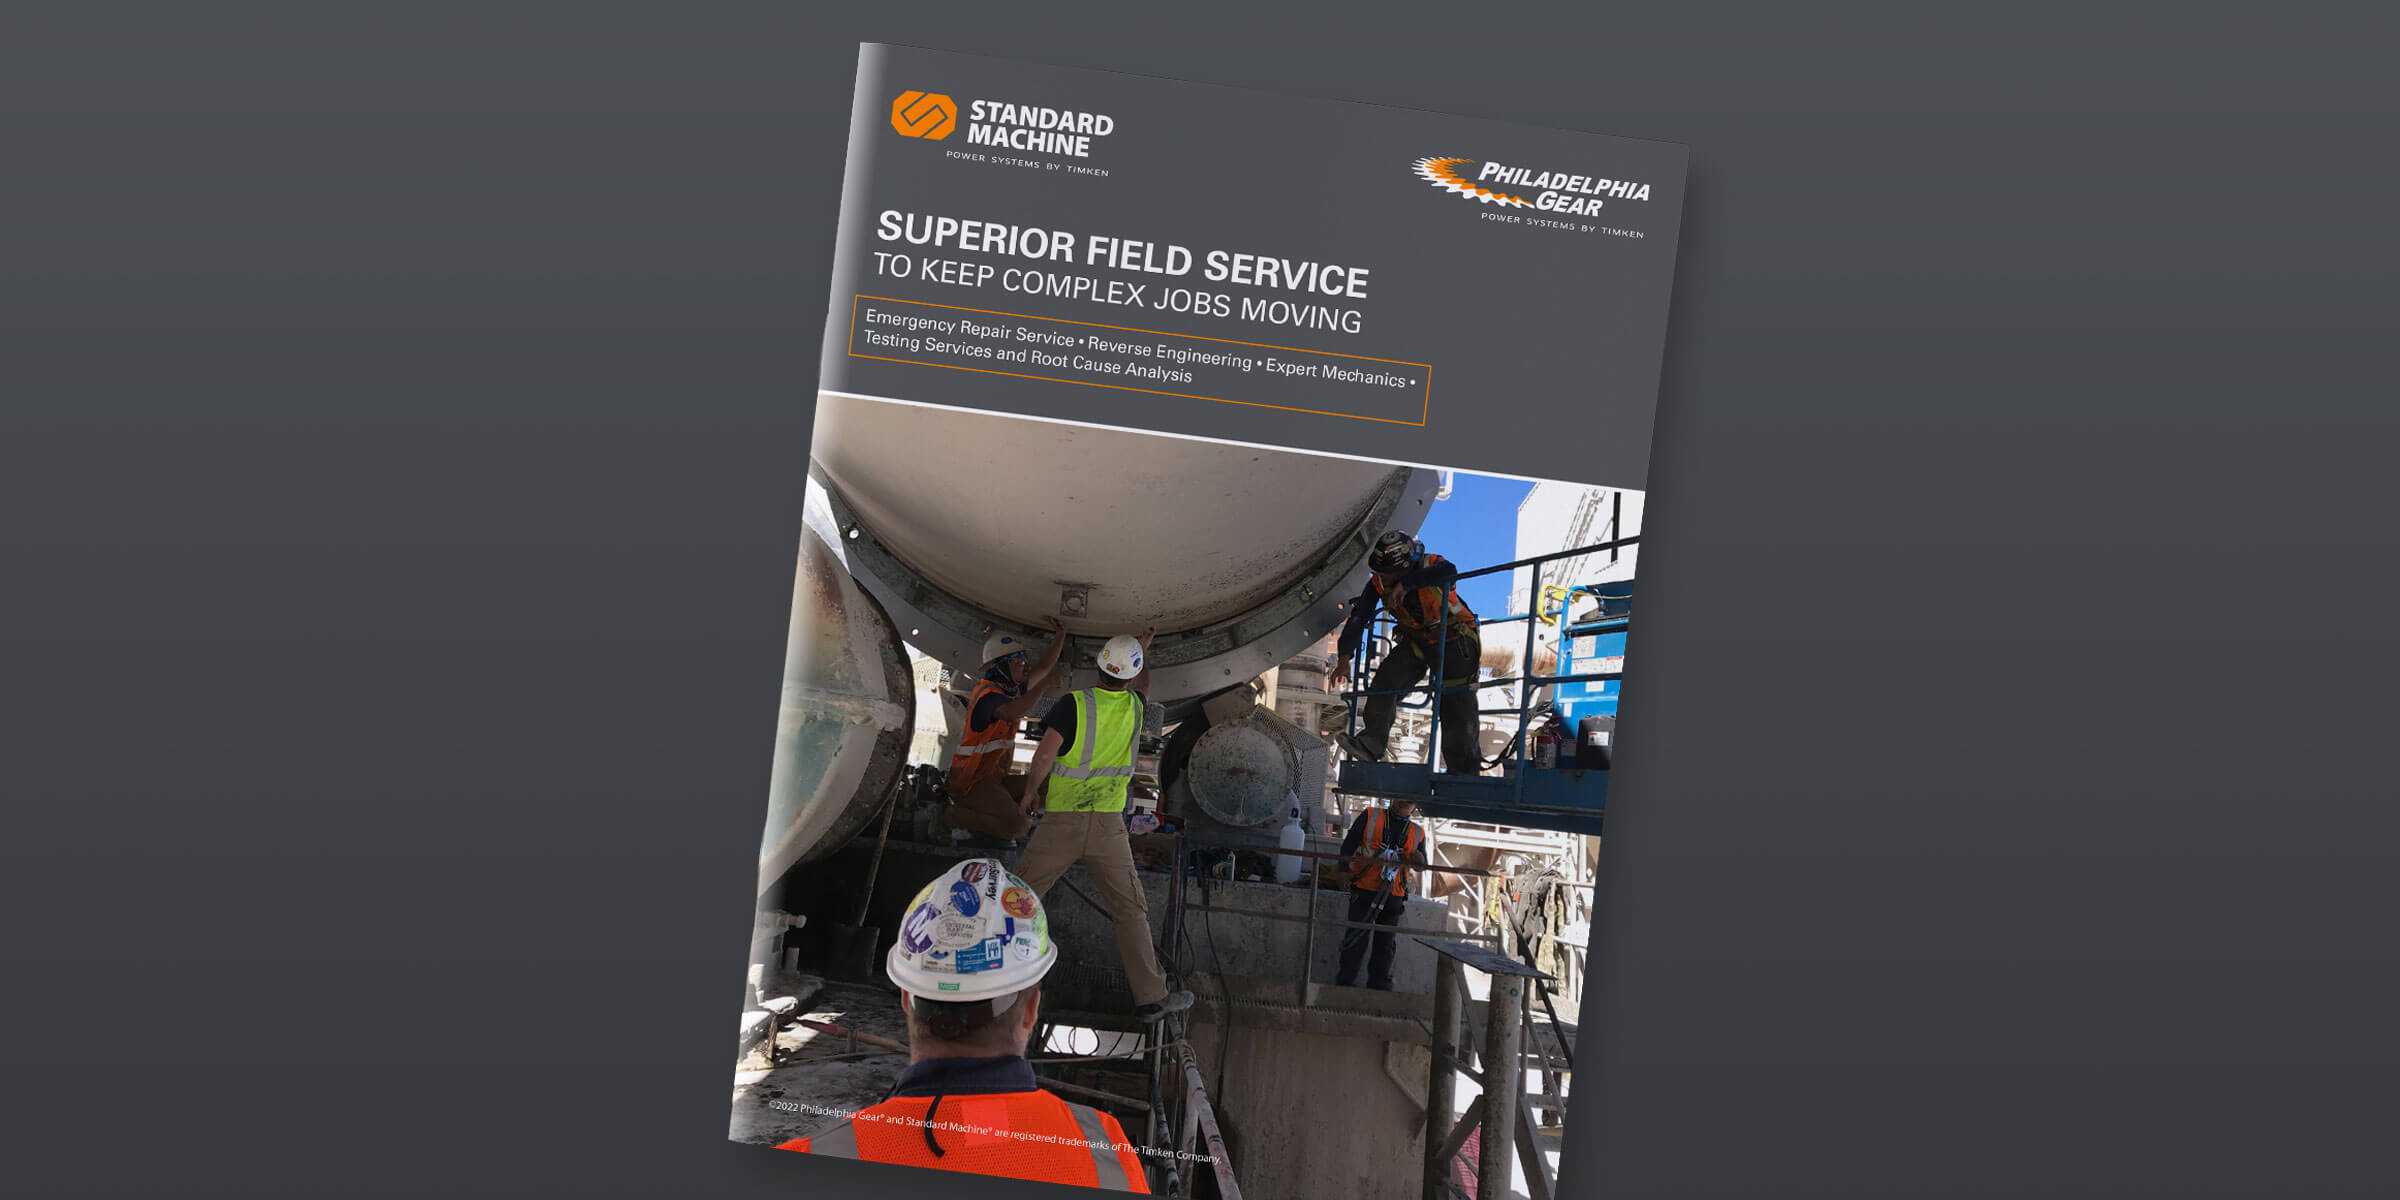 Field service solutions brochure for emergency repair service, reverse engineering, expert mechanics, testing, and root cause analysis by Standard Machine and Philadelphia Gear.